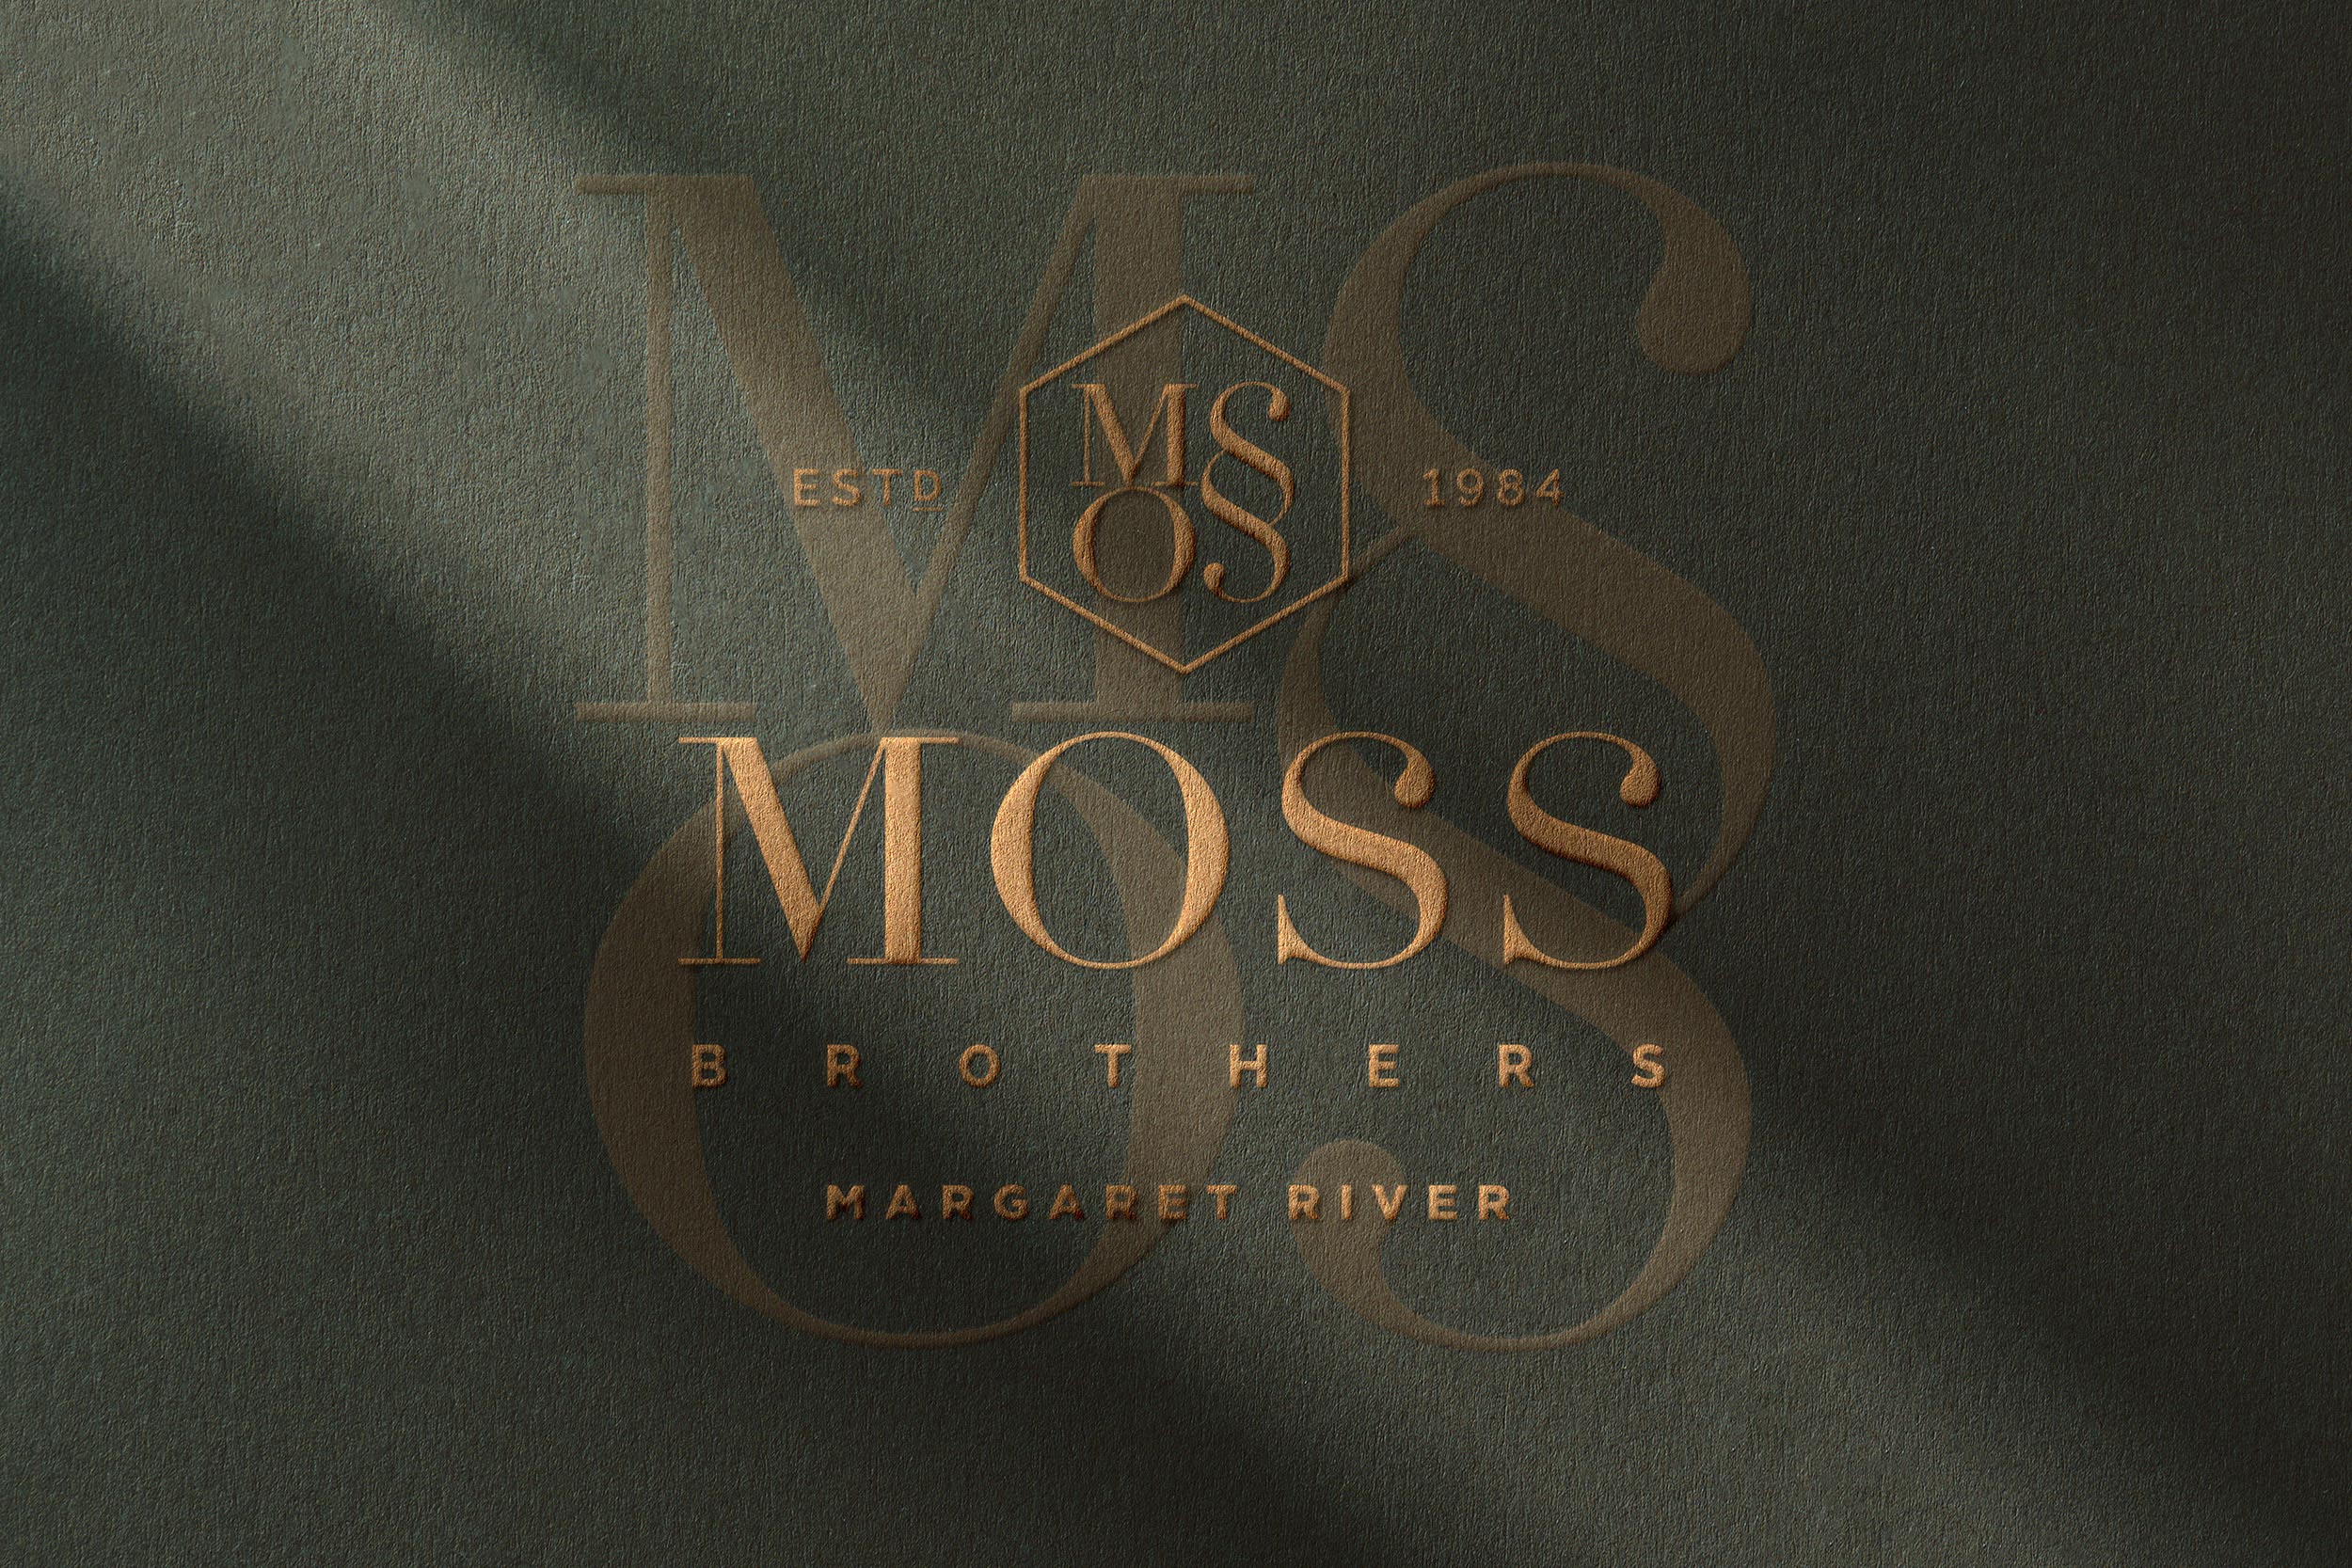 Harcus Design Create Brand Identity and Packaging Design for The Moss Brothers of Margaret River